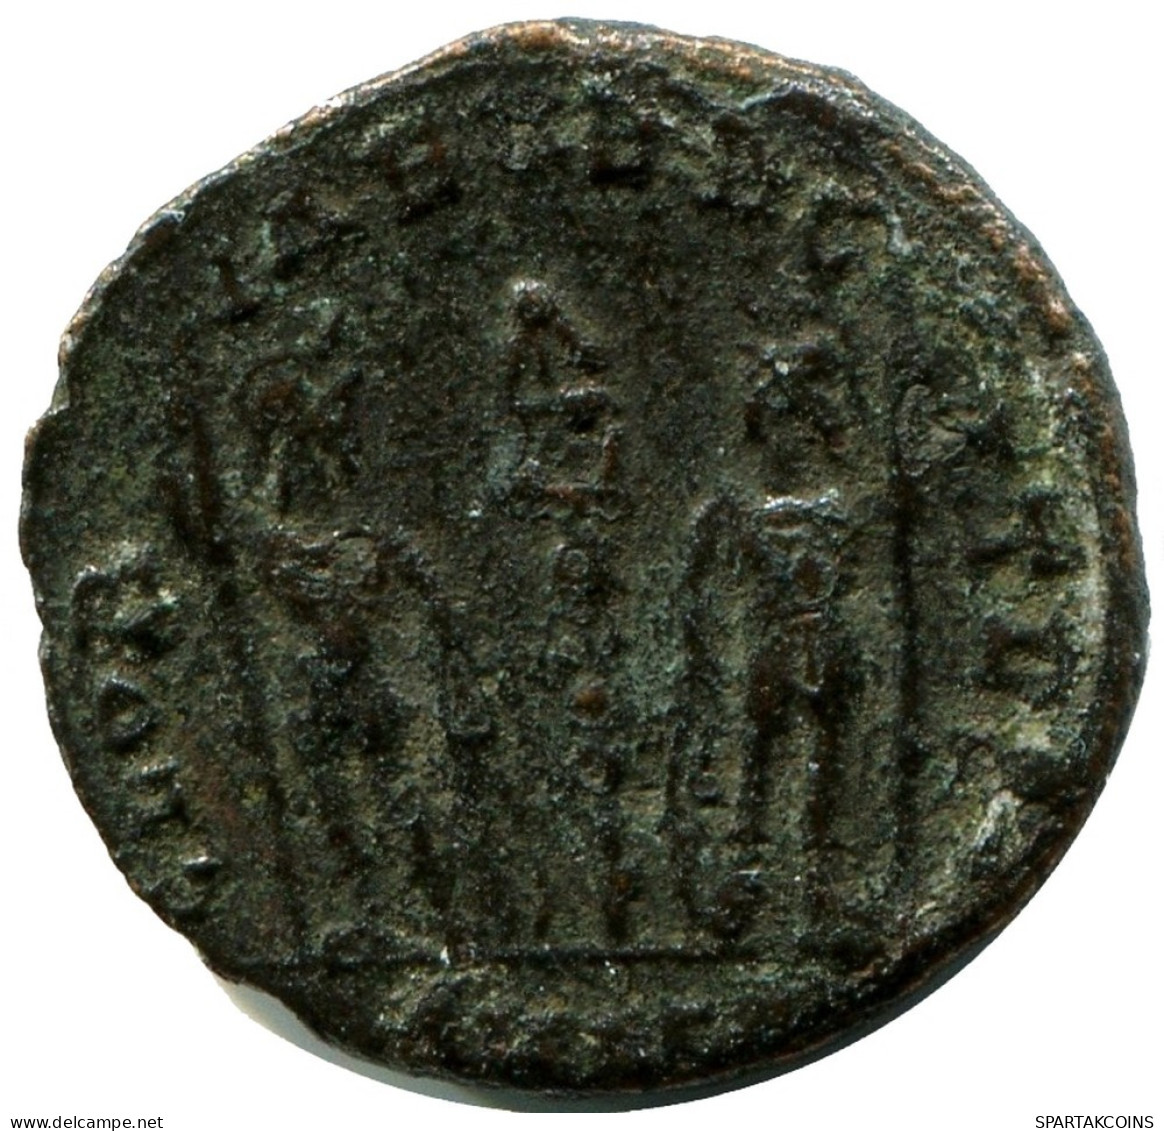 CONSTANS MINTED IN ALEKSANDRIA FROM THE ROYAL ONTARIO MUSEUM #ANC11401.14.F.A - Der Christlischen Kaiser (307 / 363)